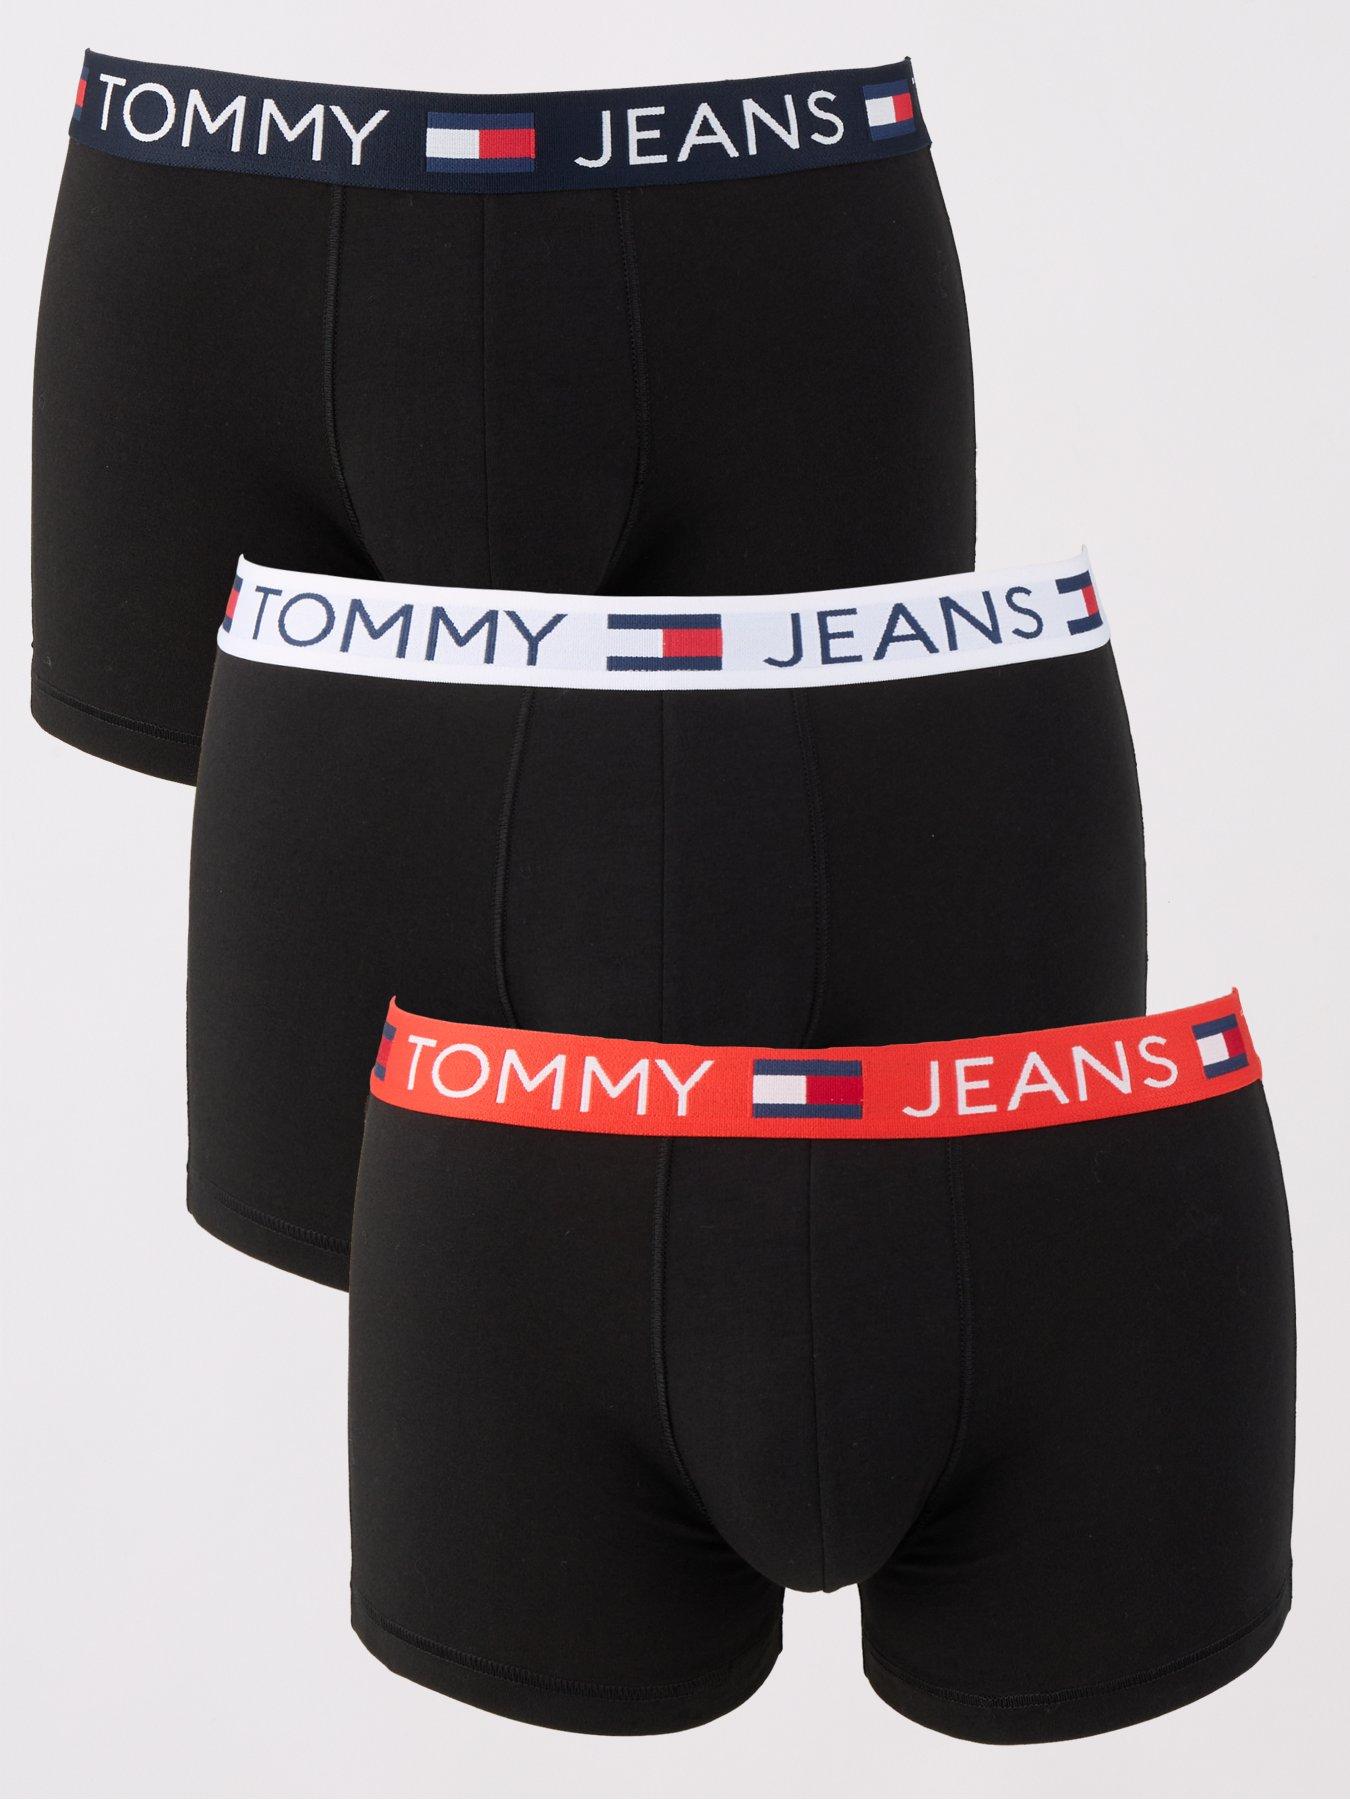 Tommy Hilfiger 3 Pack Contrast Waistband Trunks